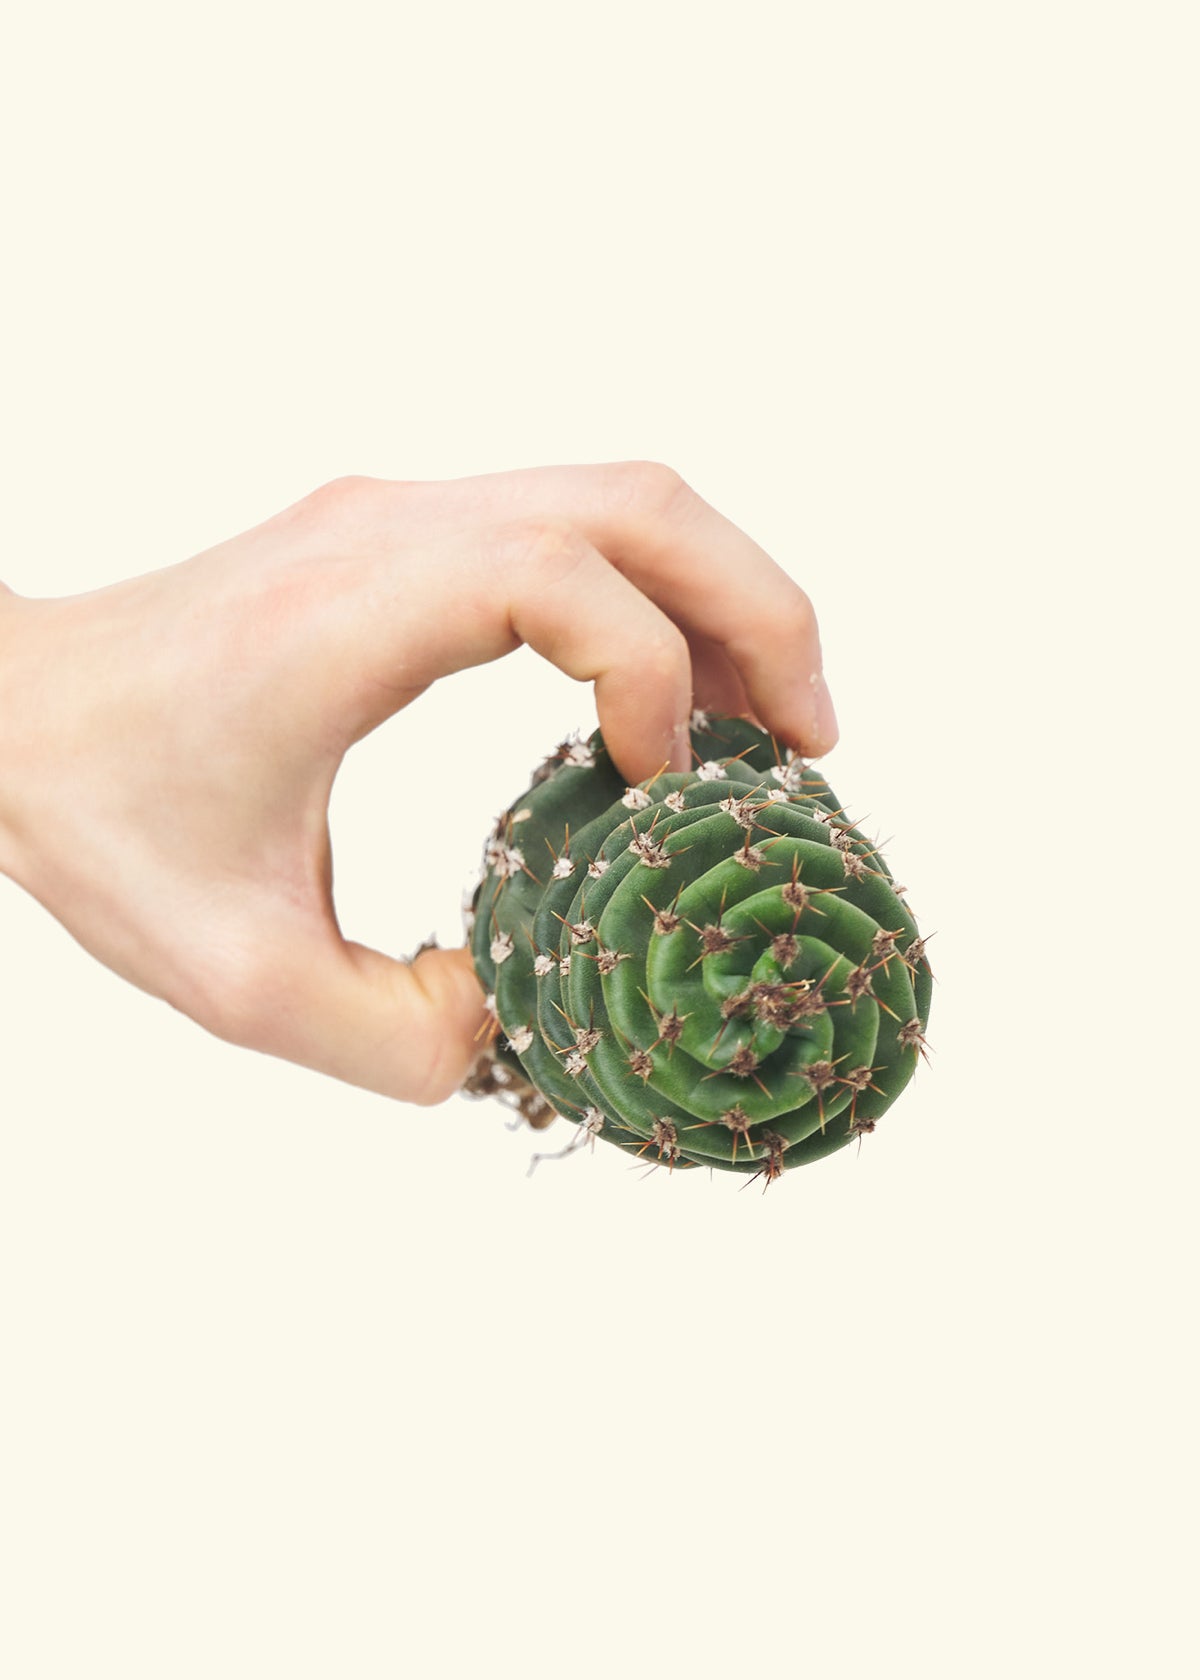 Hand holding a spiral cactus, top profile